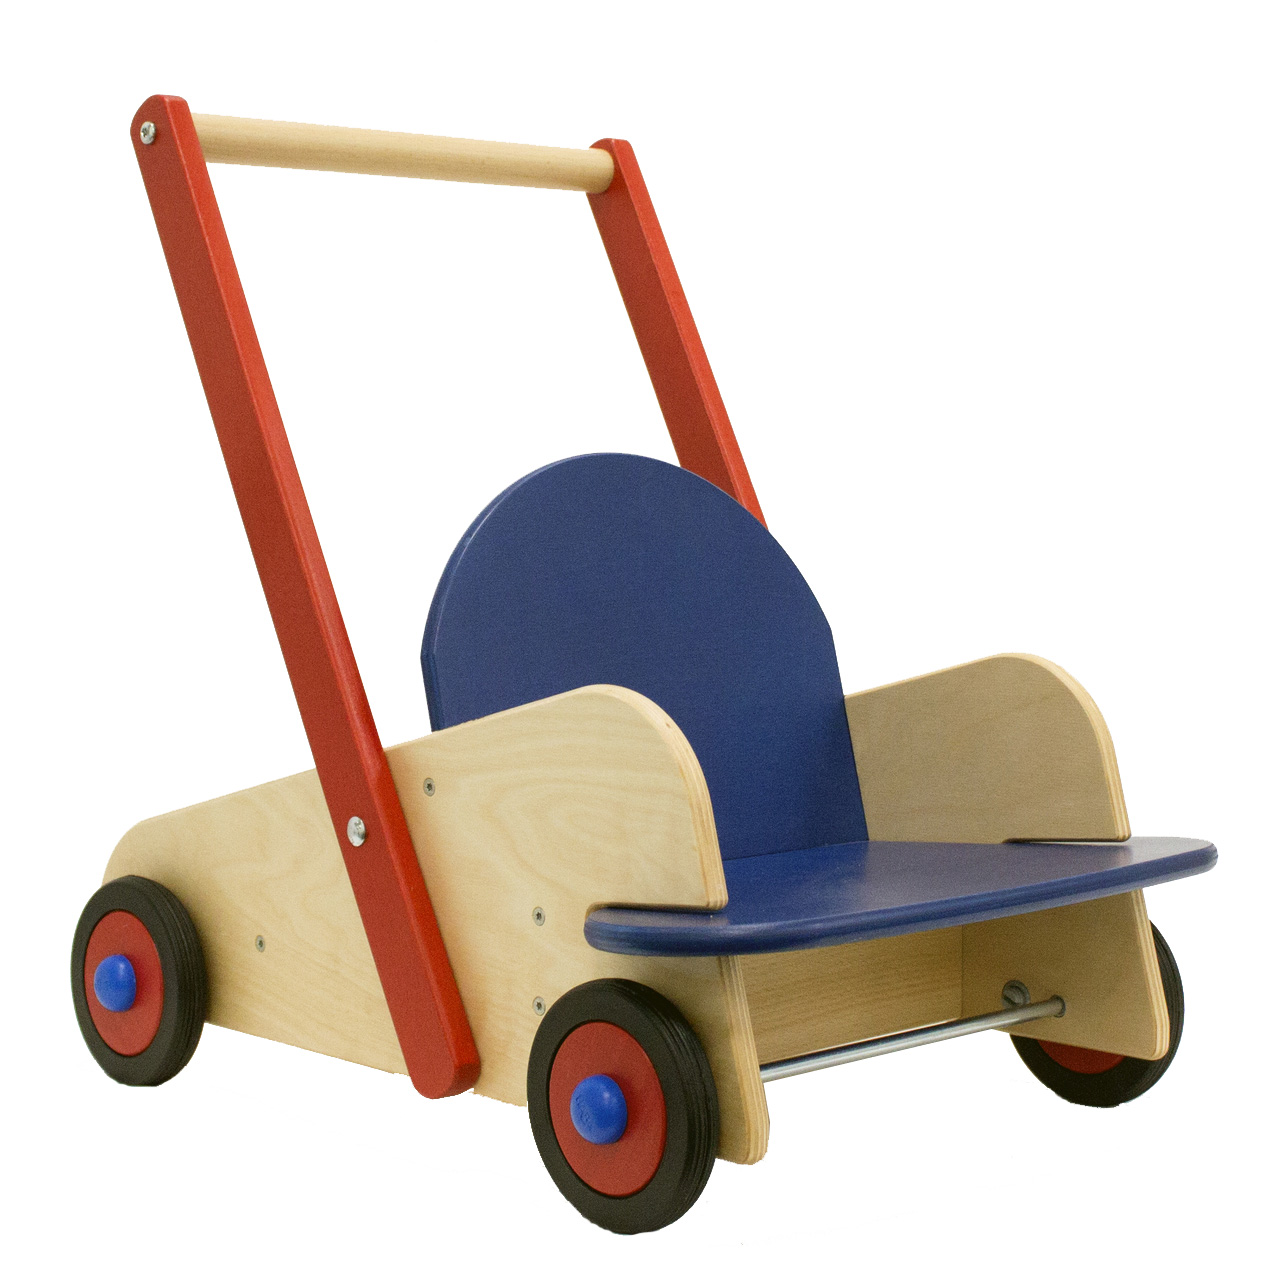 HABA Walker Wagon - First Push Toy with Seat & Storage for 10 Months and Up - image 1 of 8